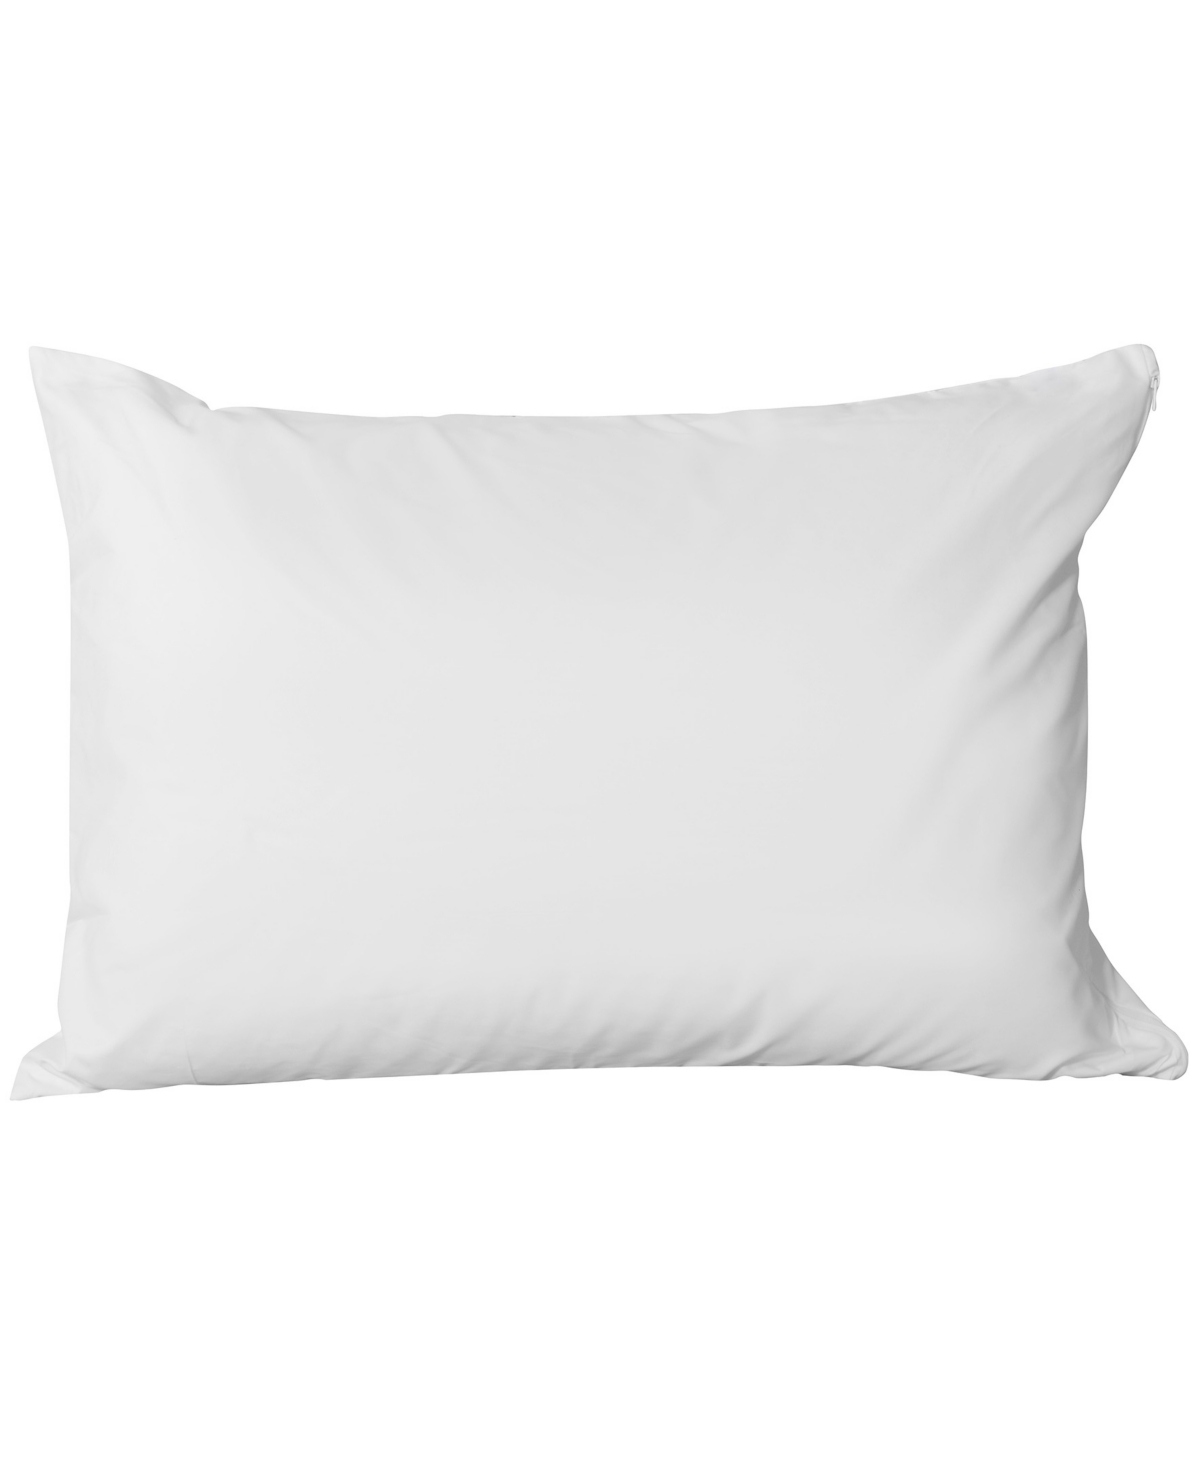 AllerEase Reserve Cotton Fresh Pillow Protector, King